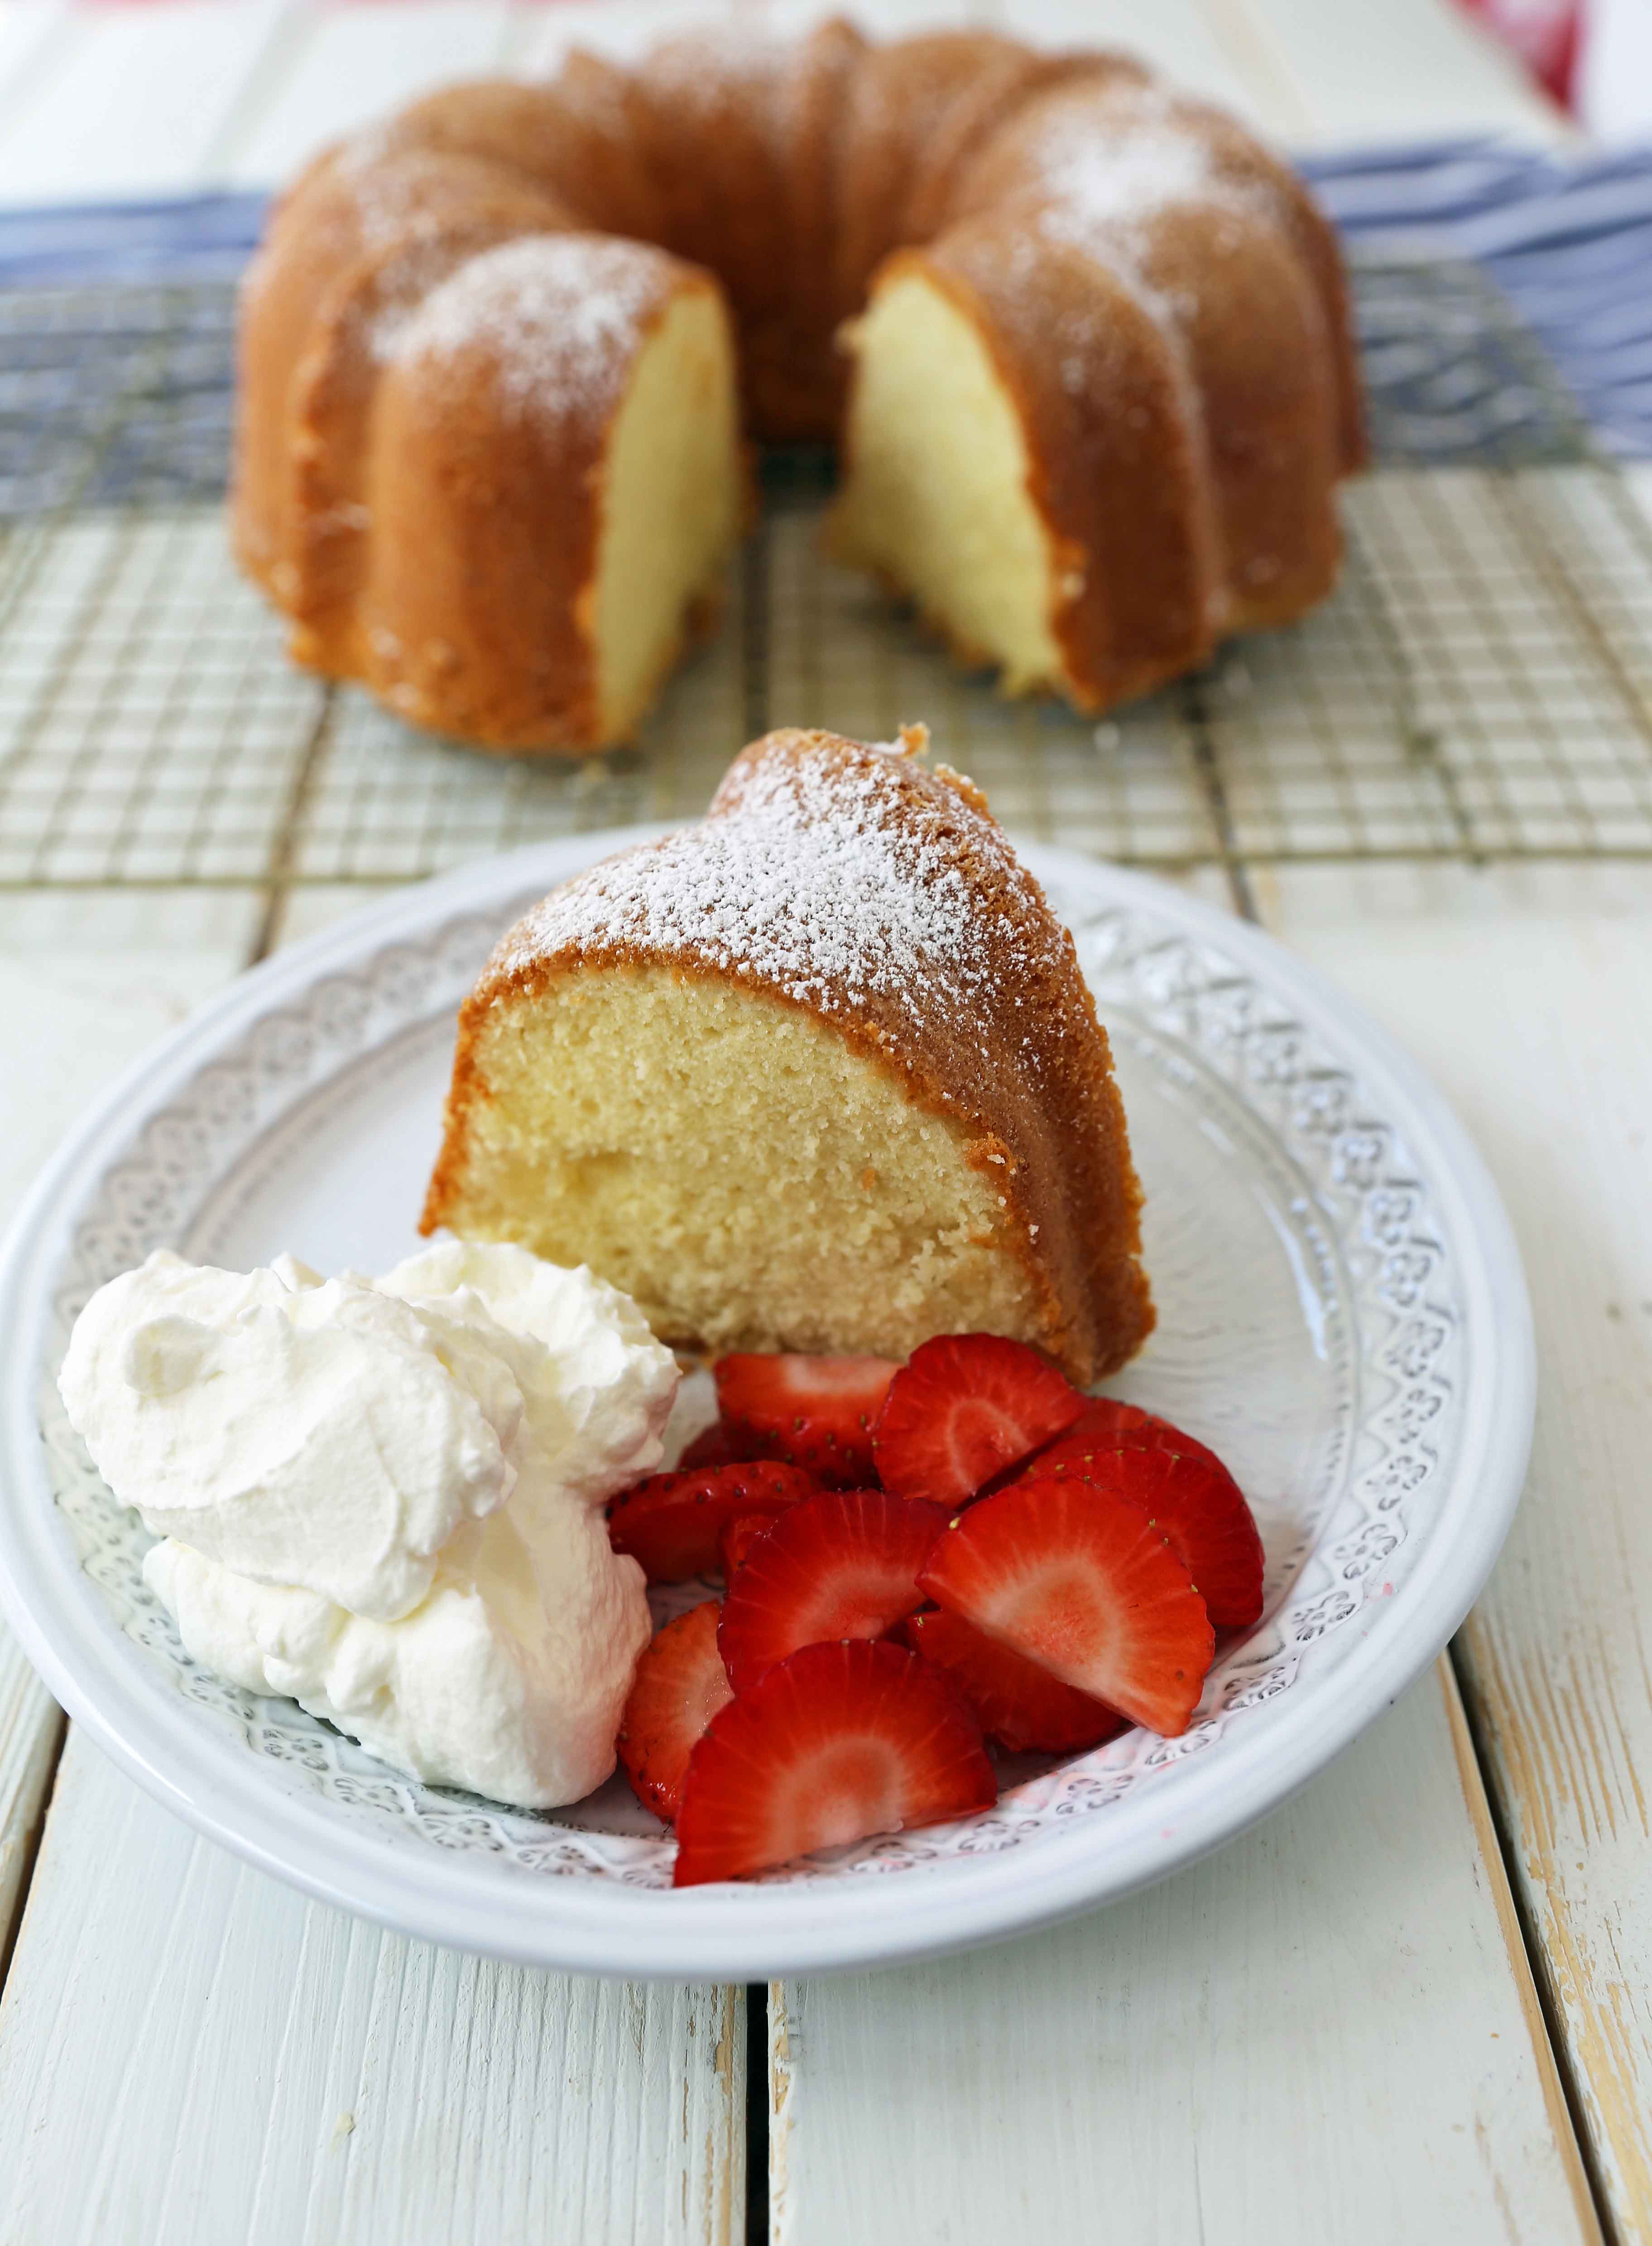 The BEST Cream Cheese Pound Cake with fresh strawberries and whipped cream. How to make the perfect pound cake in a bundt pan. Buttery cream cheese pound cake goes with everything! This is such a popular cake that is wonderful on its own or in a trifle or berry compote. www.modernhoney.com #poundcake #bundtcake #cake #creamcheesecake